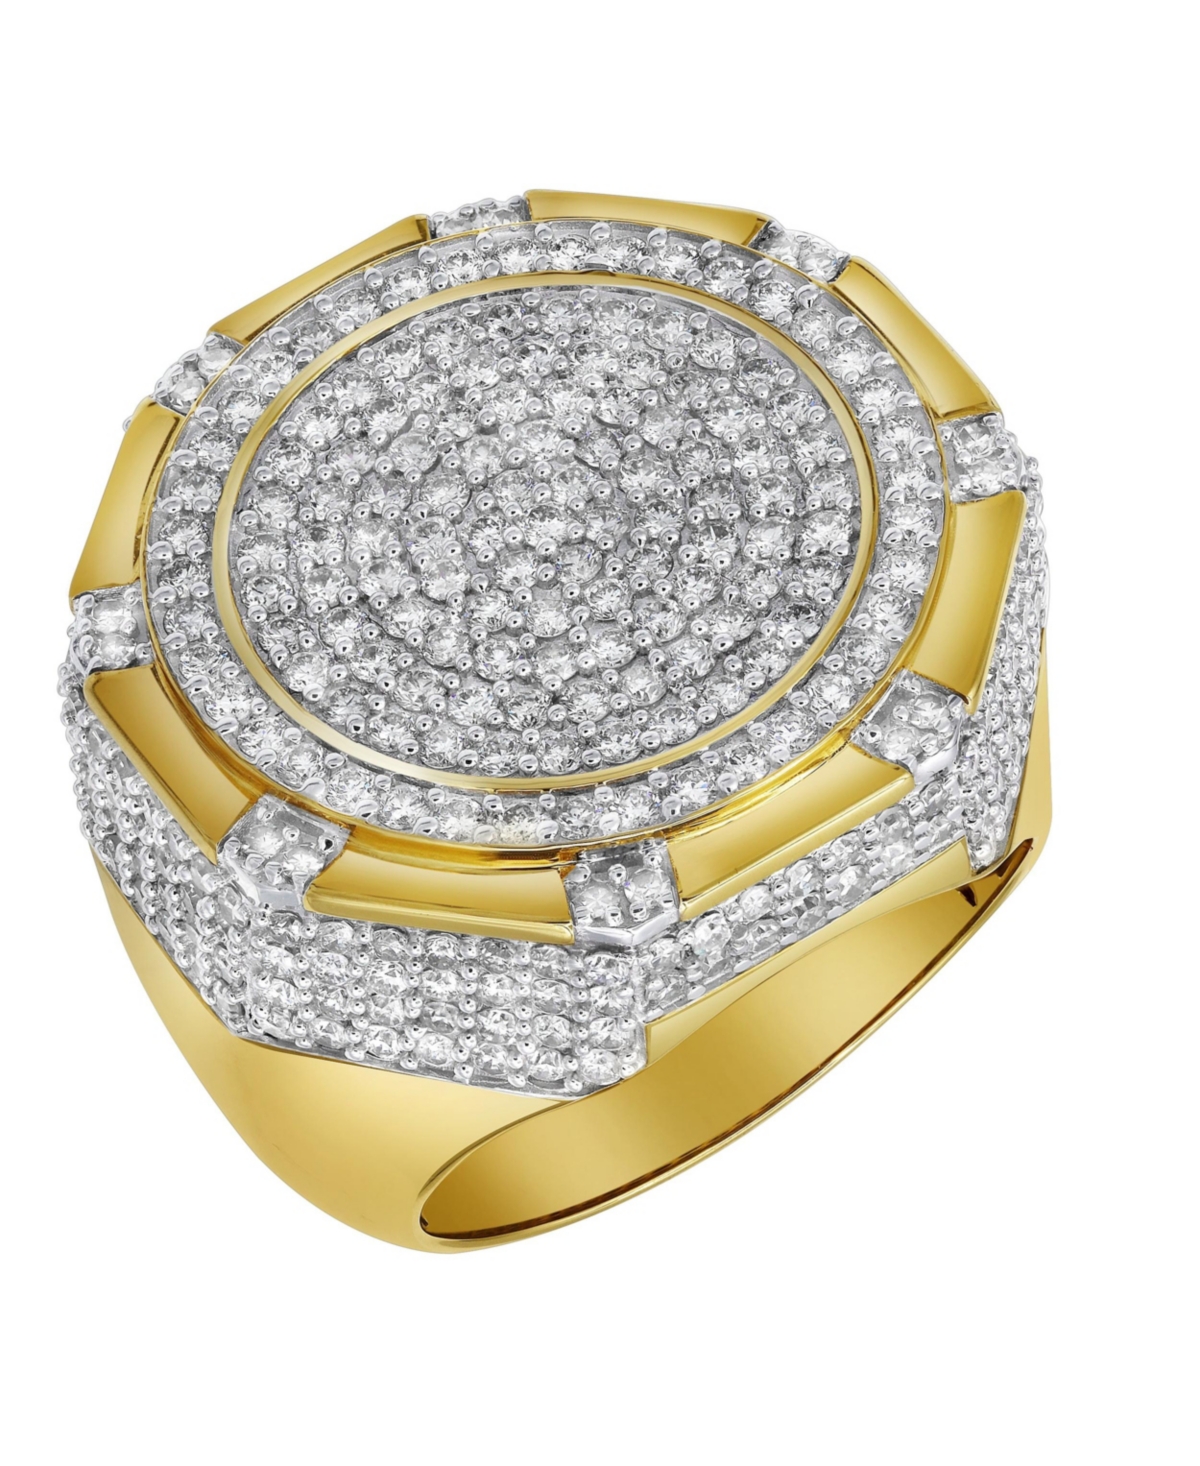 King of Kings Natural Certified Diamond 3.2 cttw Round Cut 14k Yellow Gold Statement Ring for Men - Yellow